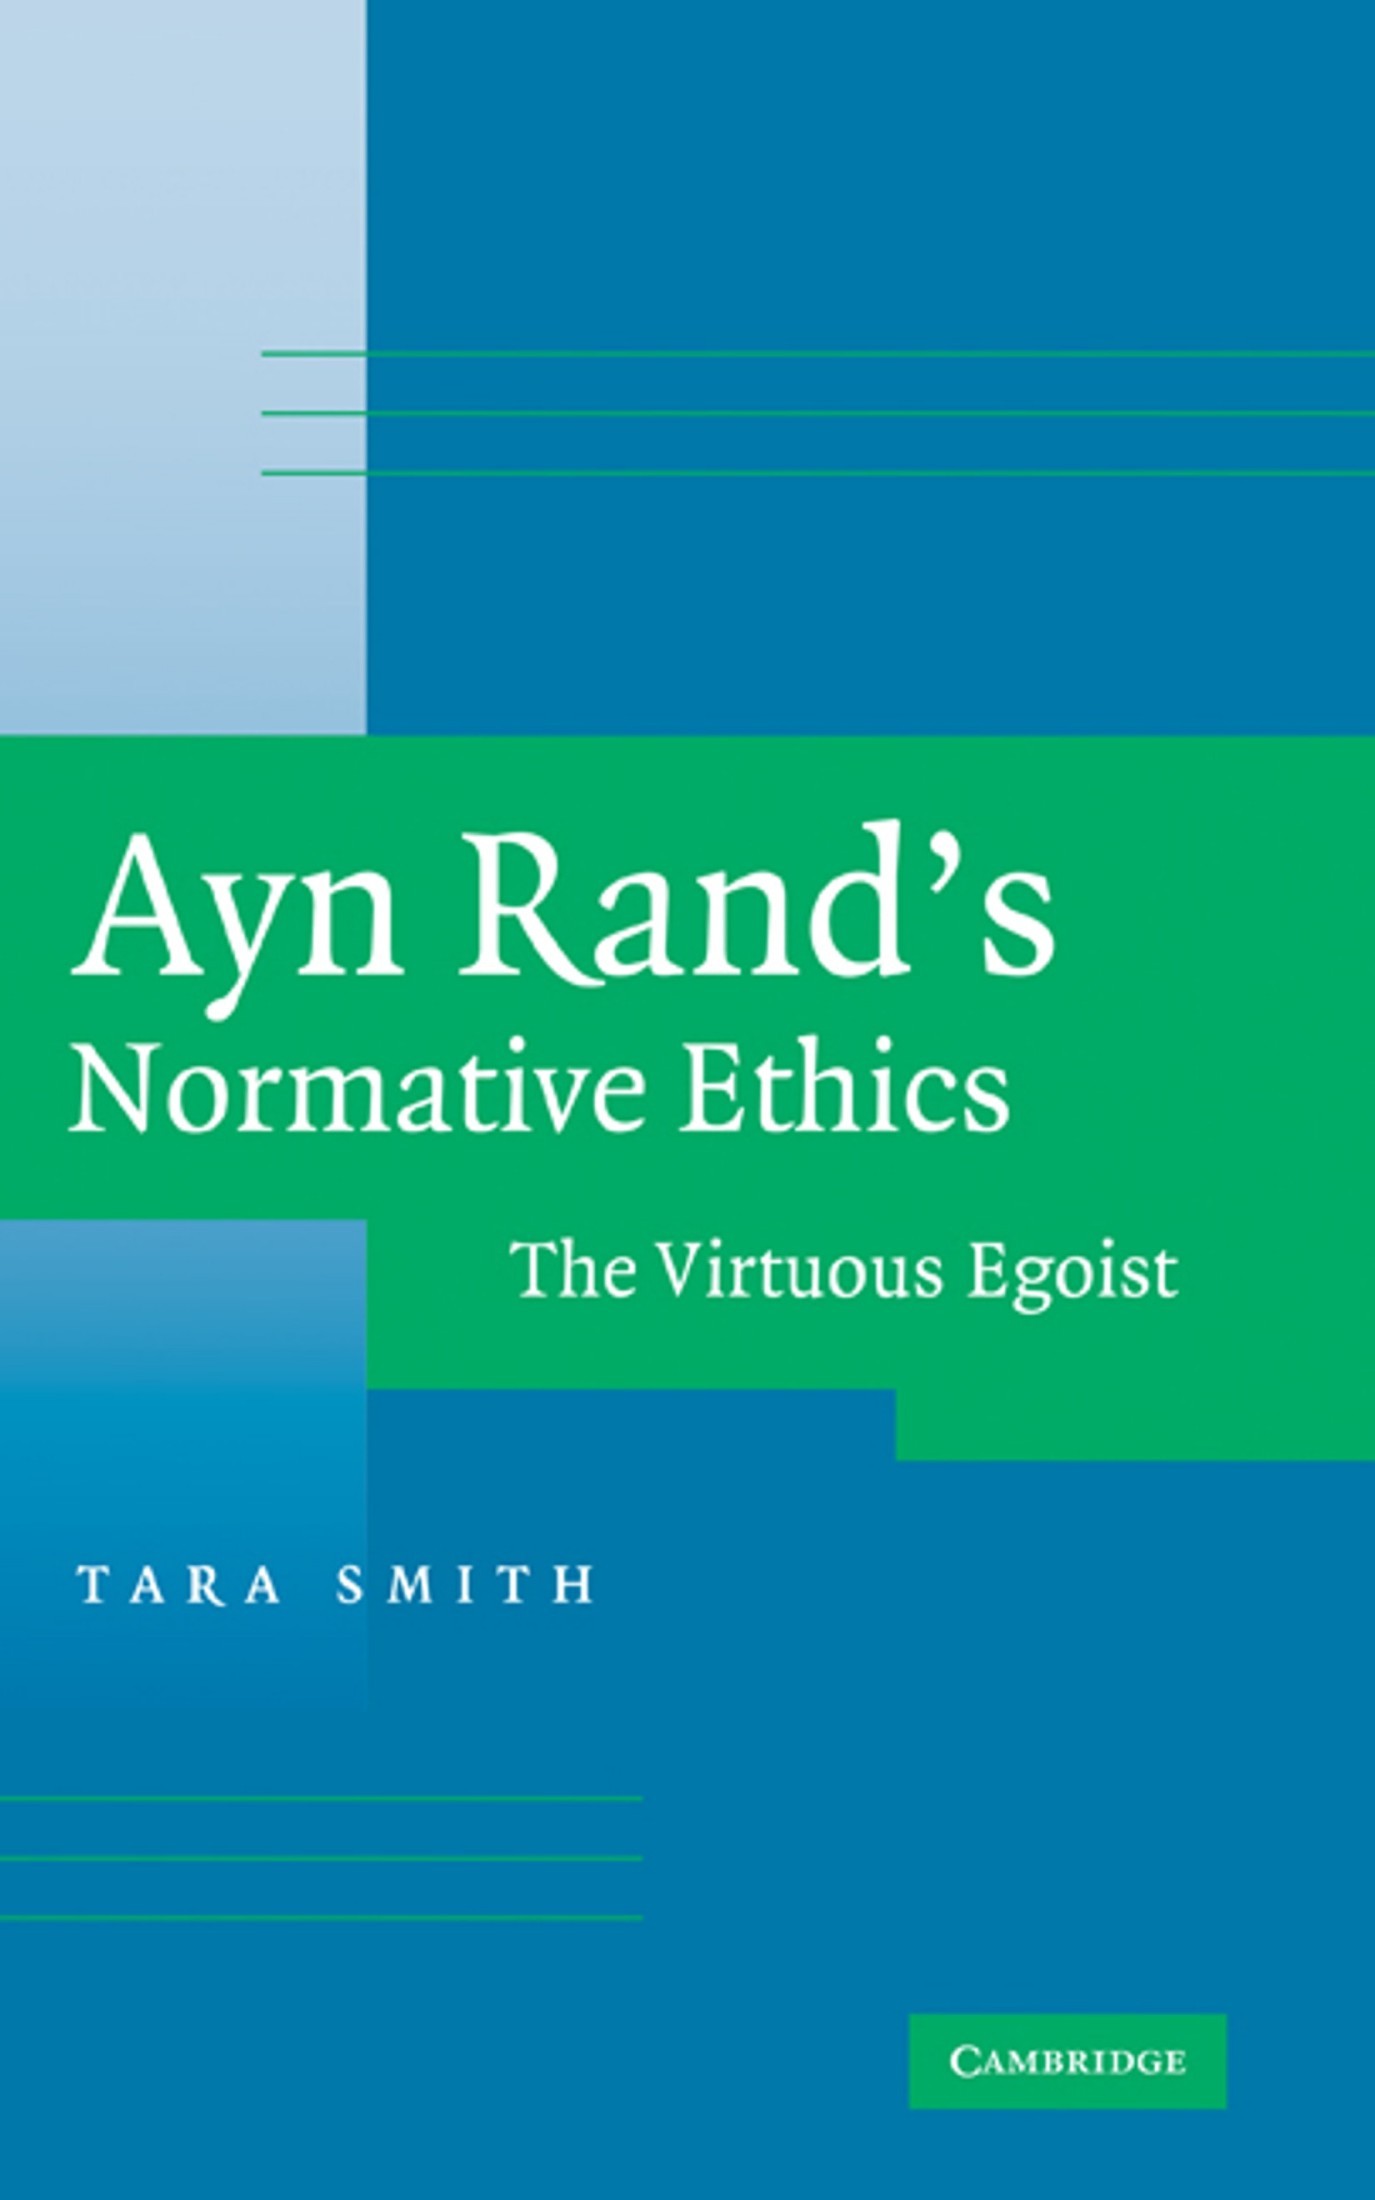 Ayn Rand's Normative Ethics: The Virtuous Egoist